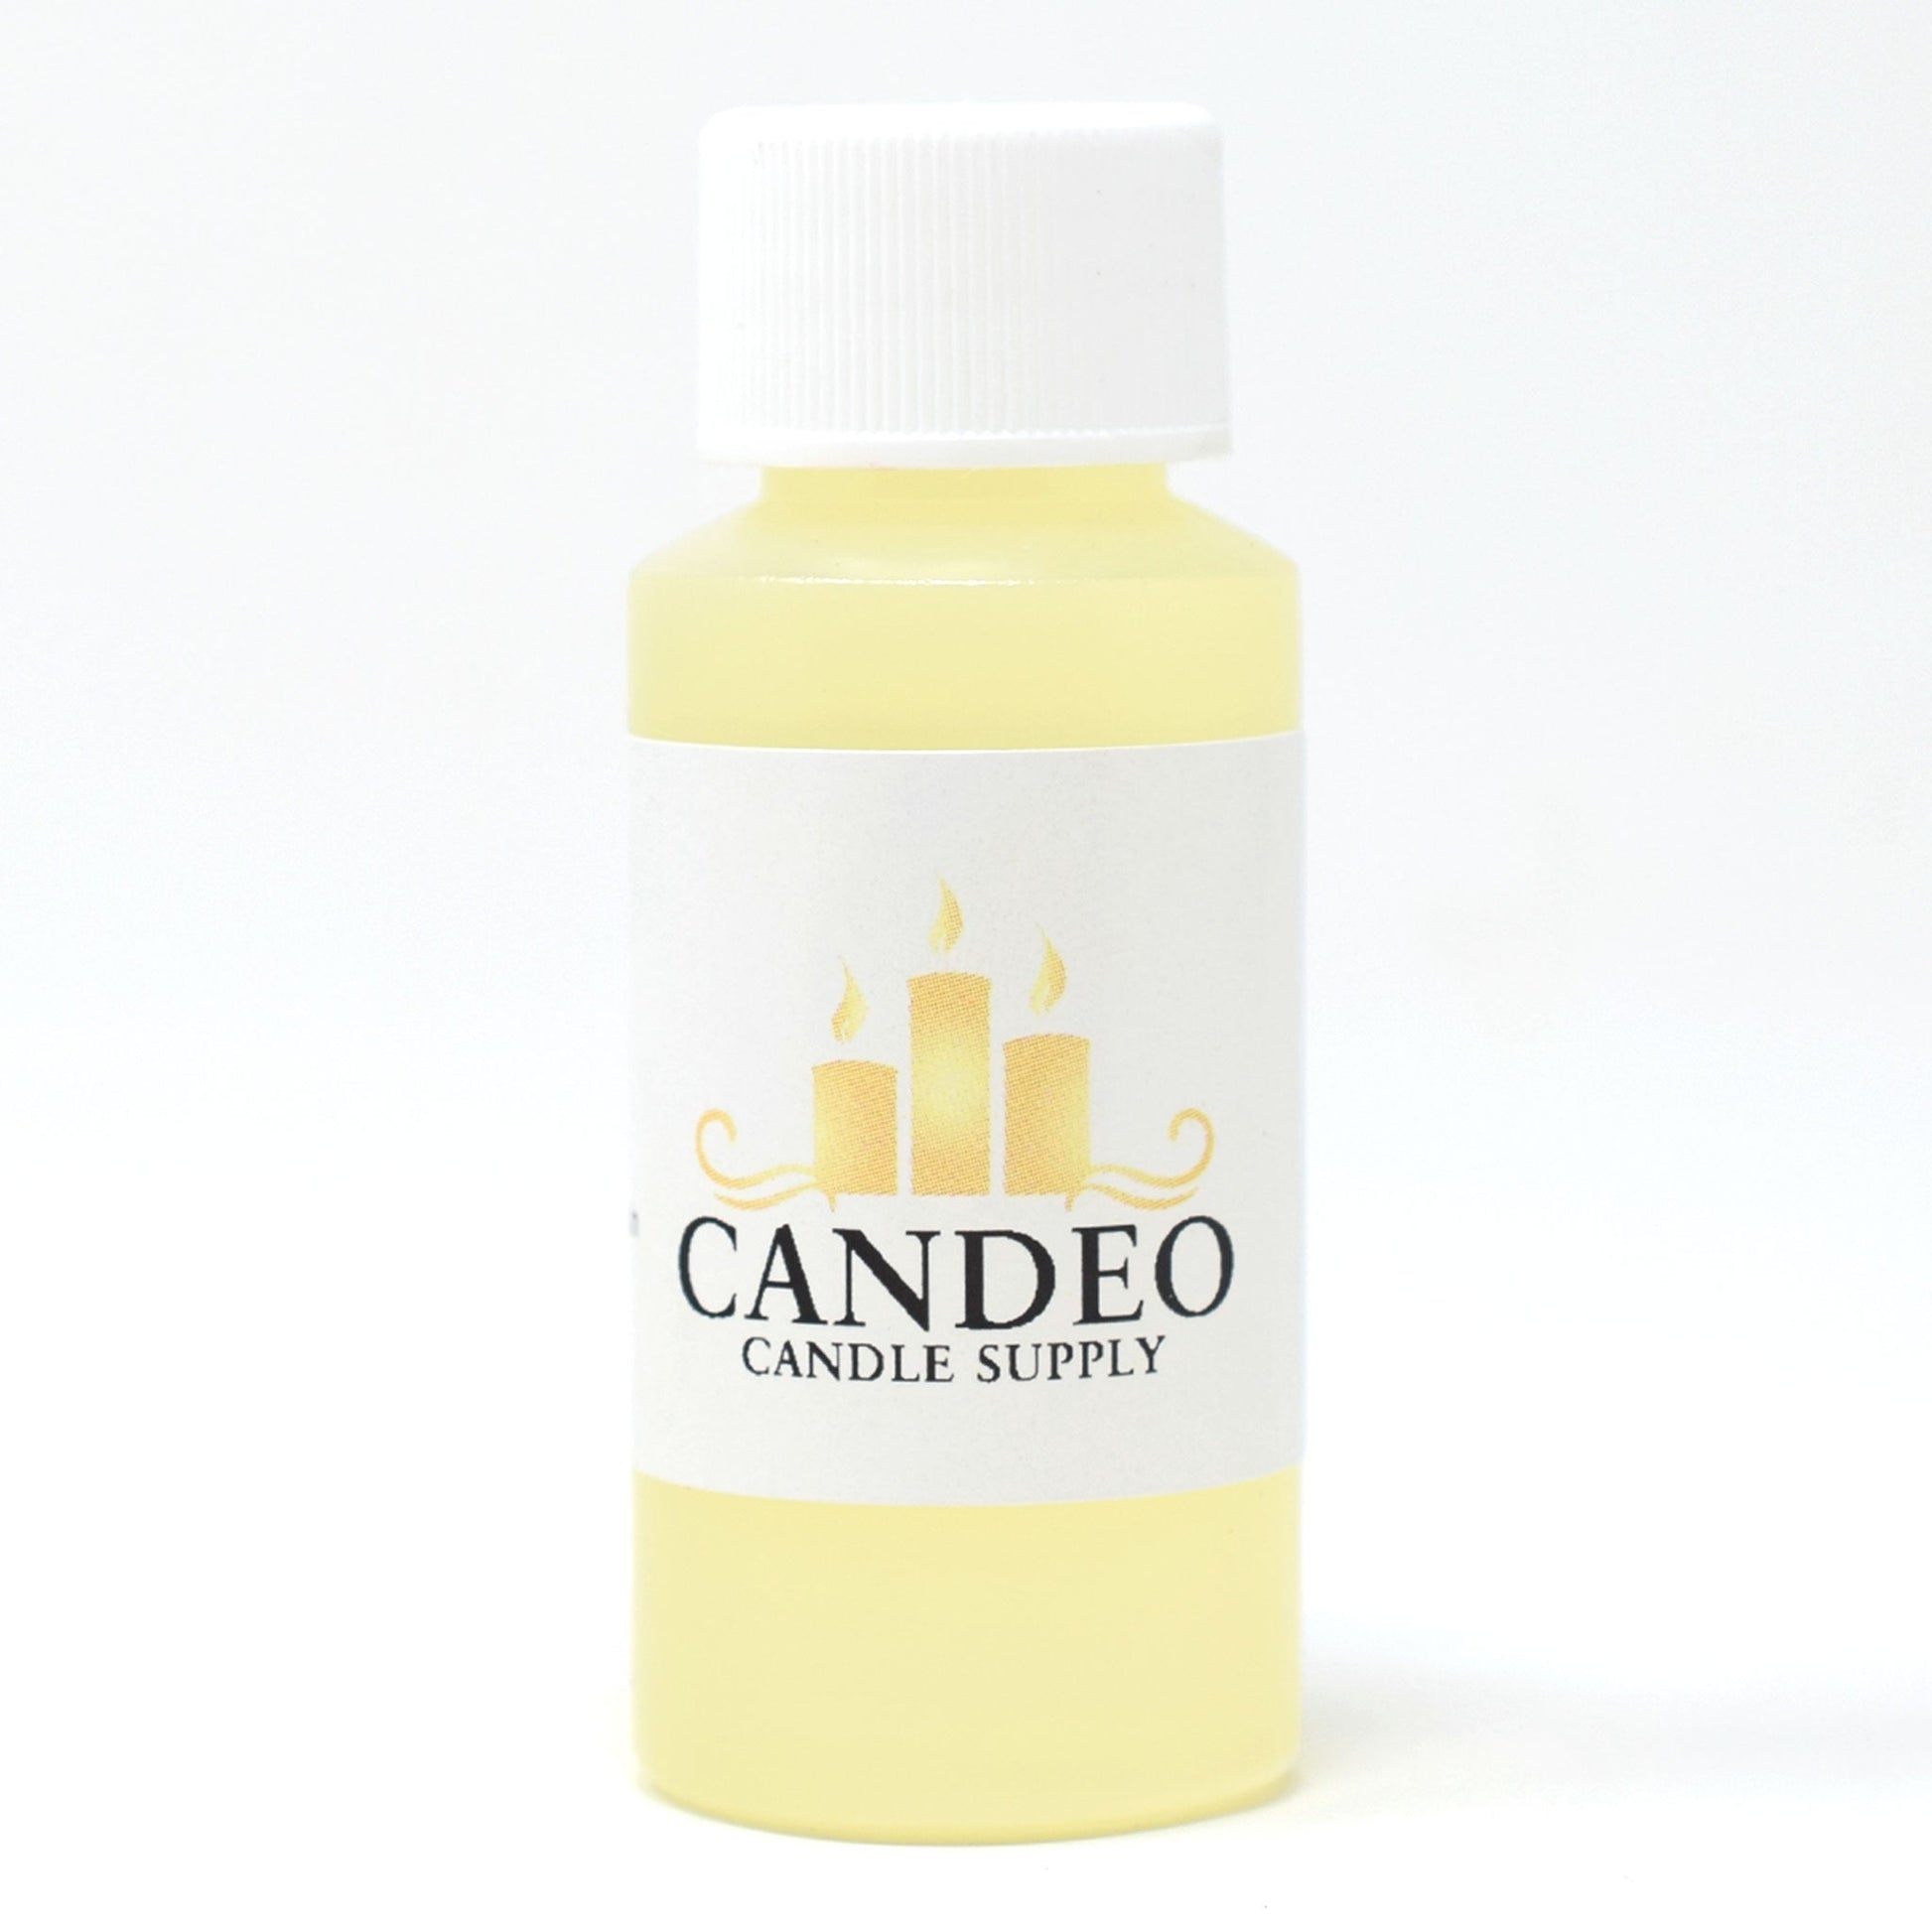 Tomato Vine Fragrance Oil - Candeo Candle Supply